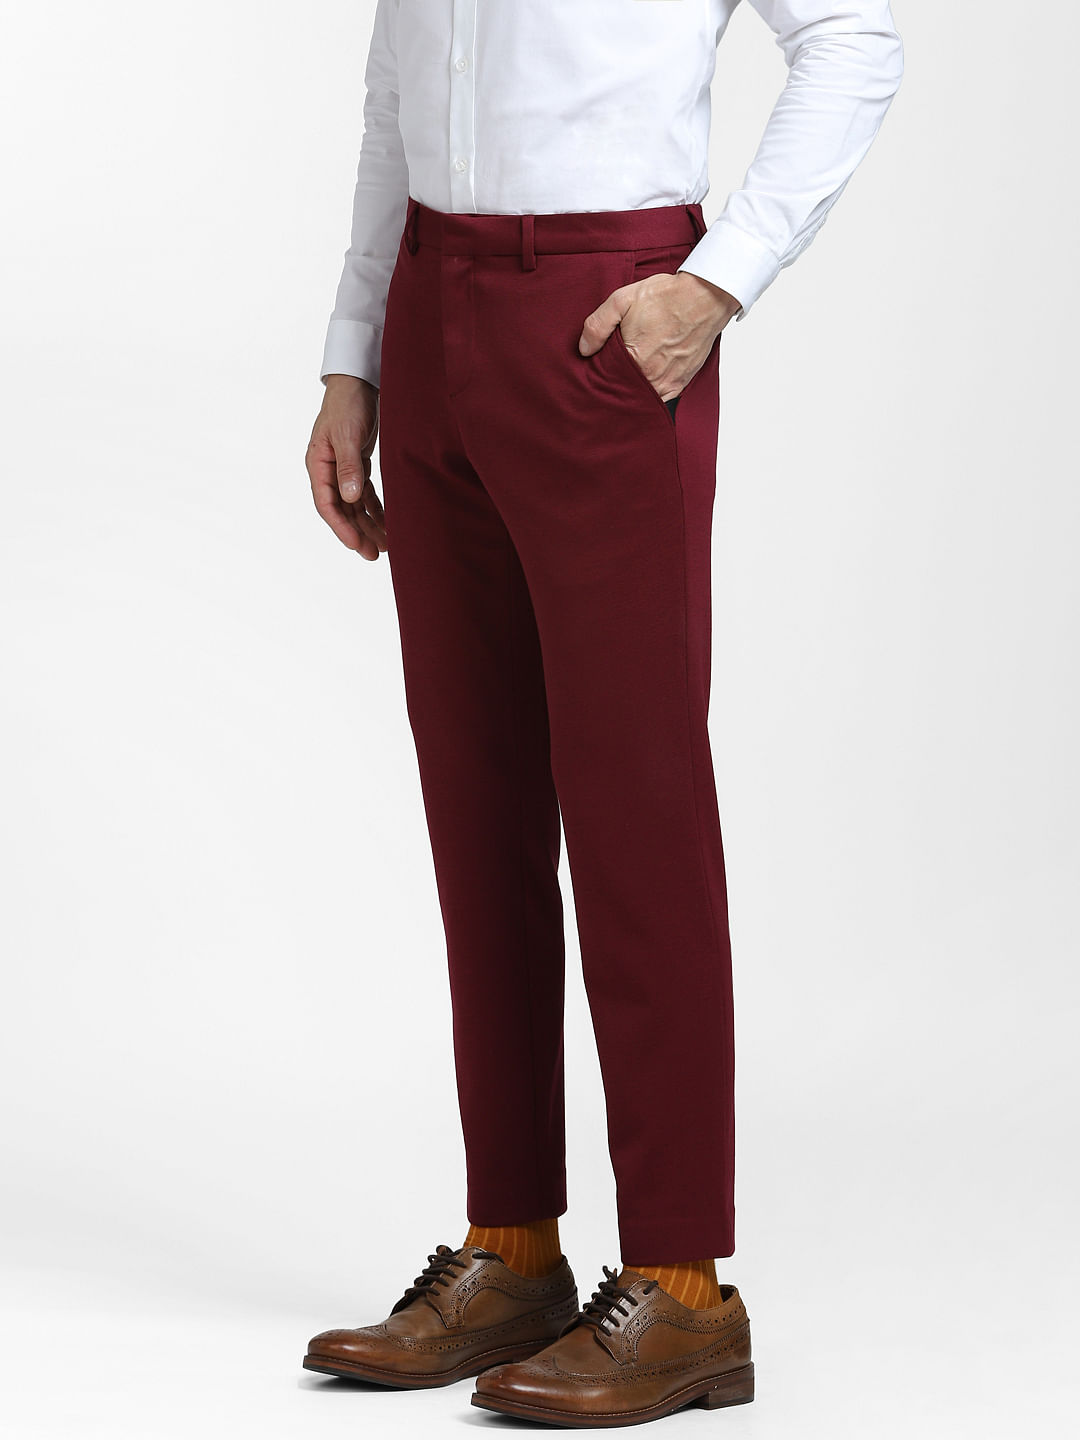 The Good, Better, Best in Trousers For Men | The HUB